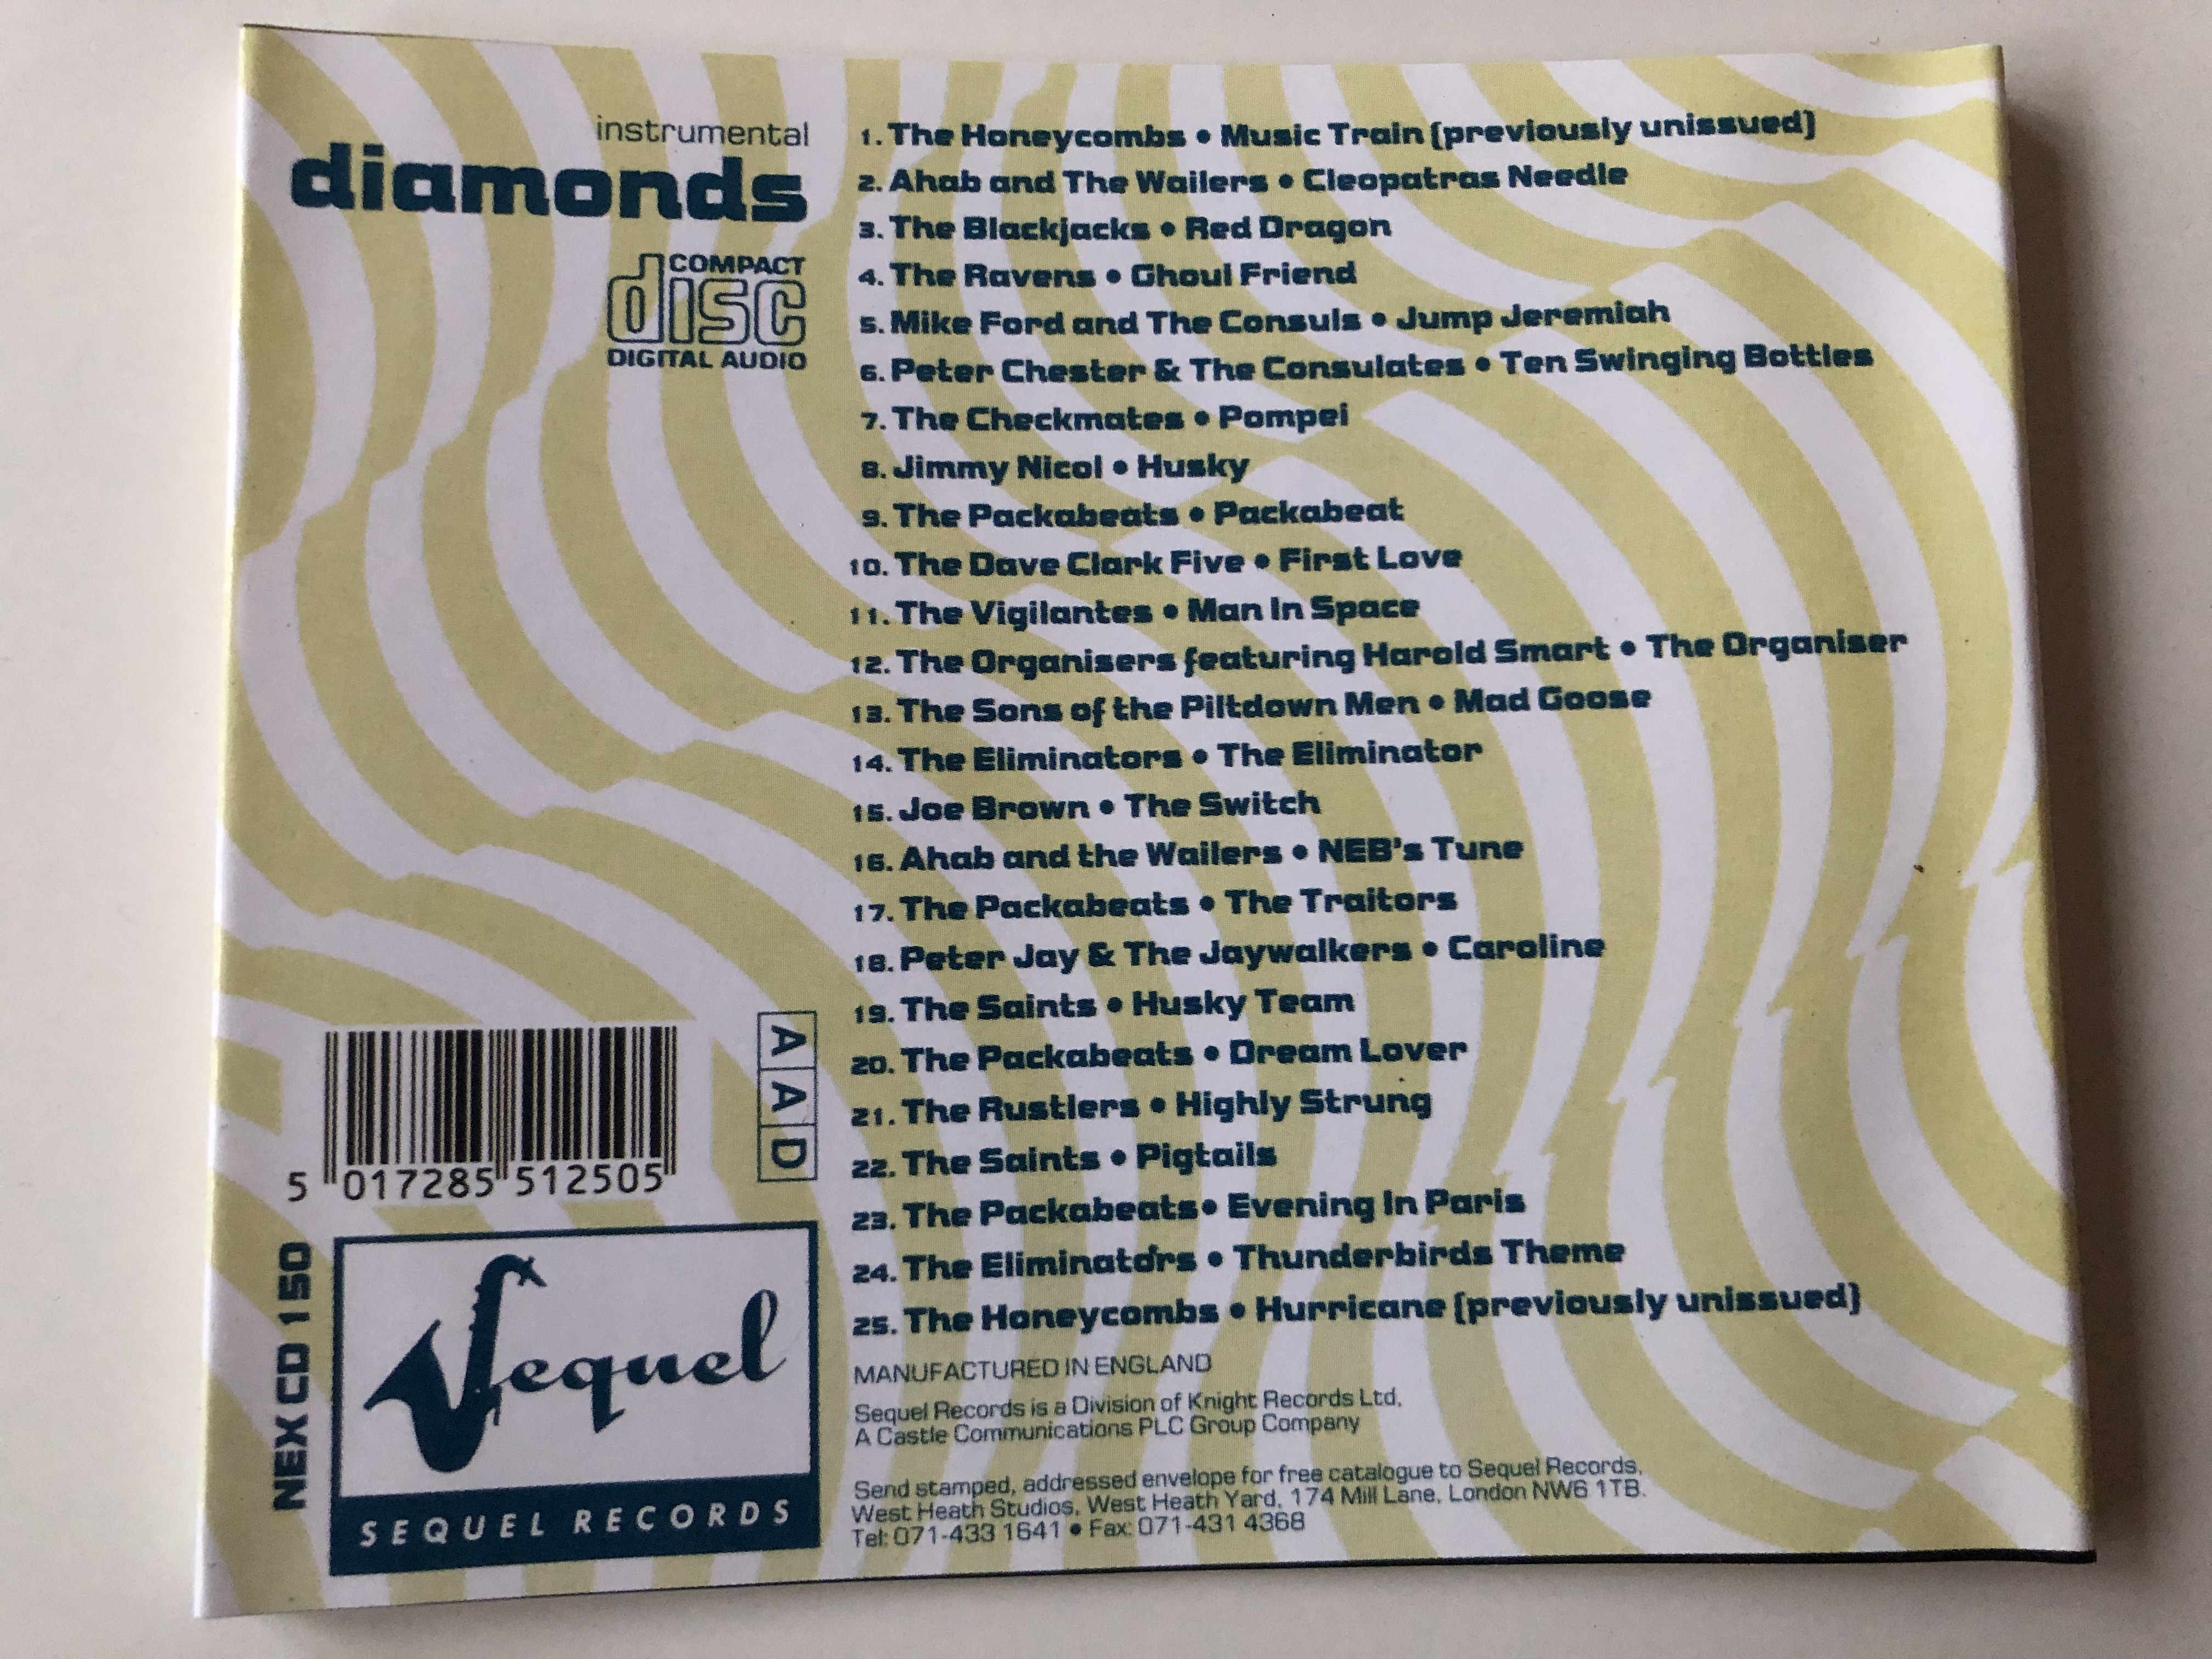 instrumental-diamonds-2-highly-strung-british-60-s-instrumentals-including-two-previously-unissued-honeycomb-tracks-audio-cd-sequel-records-2-.jpg